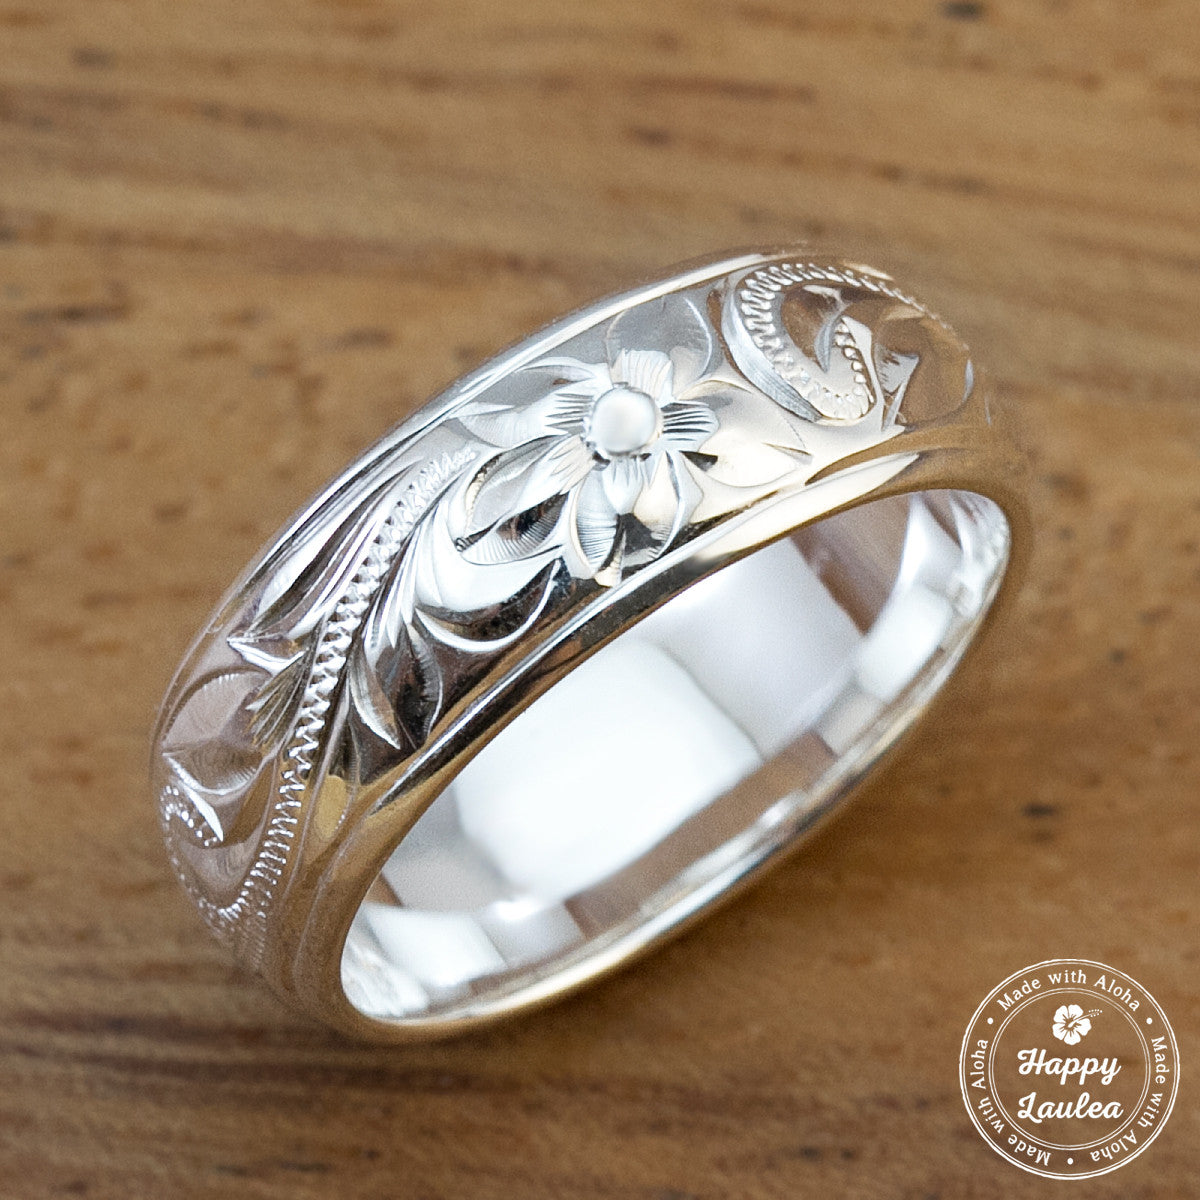 925 Stering Silver Ring Hand Engraved Old English Design with Polished Edges - 6mm-8mm, Dome Barrel, Standard Fitment